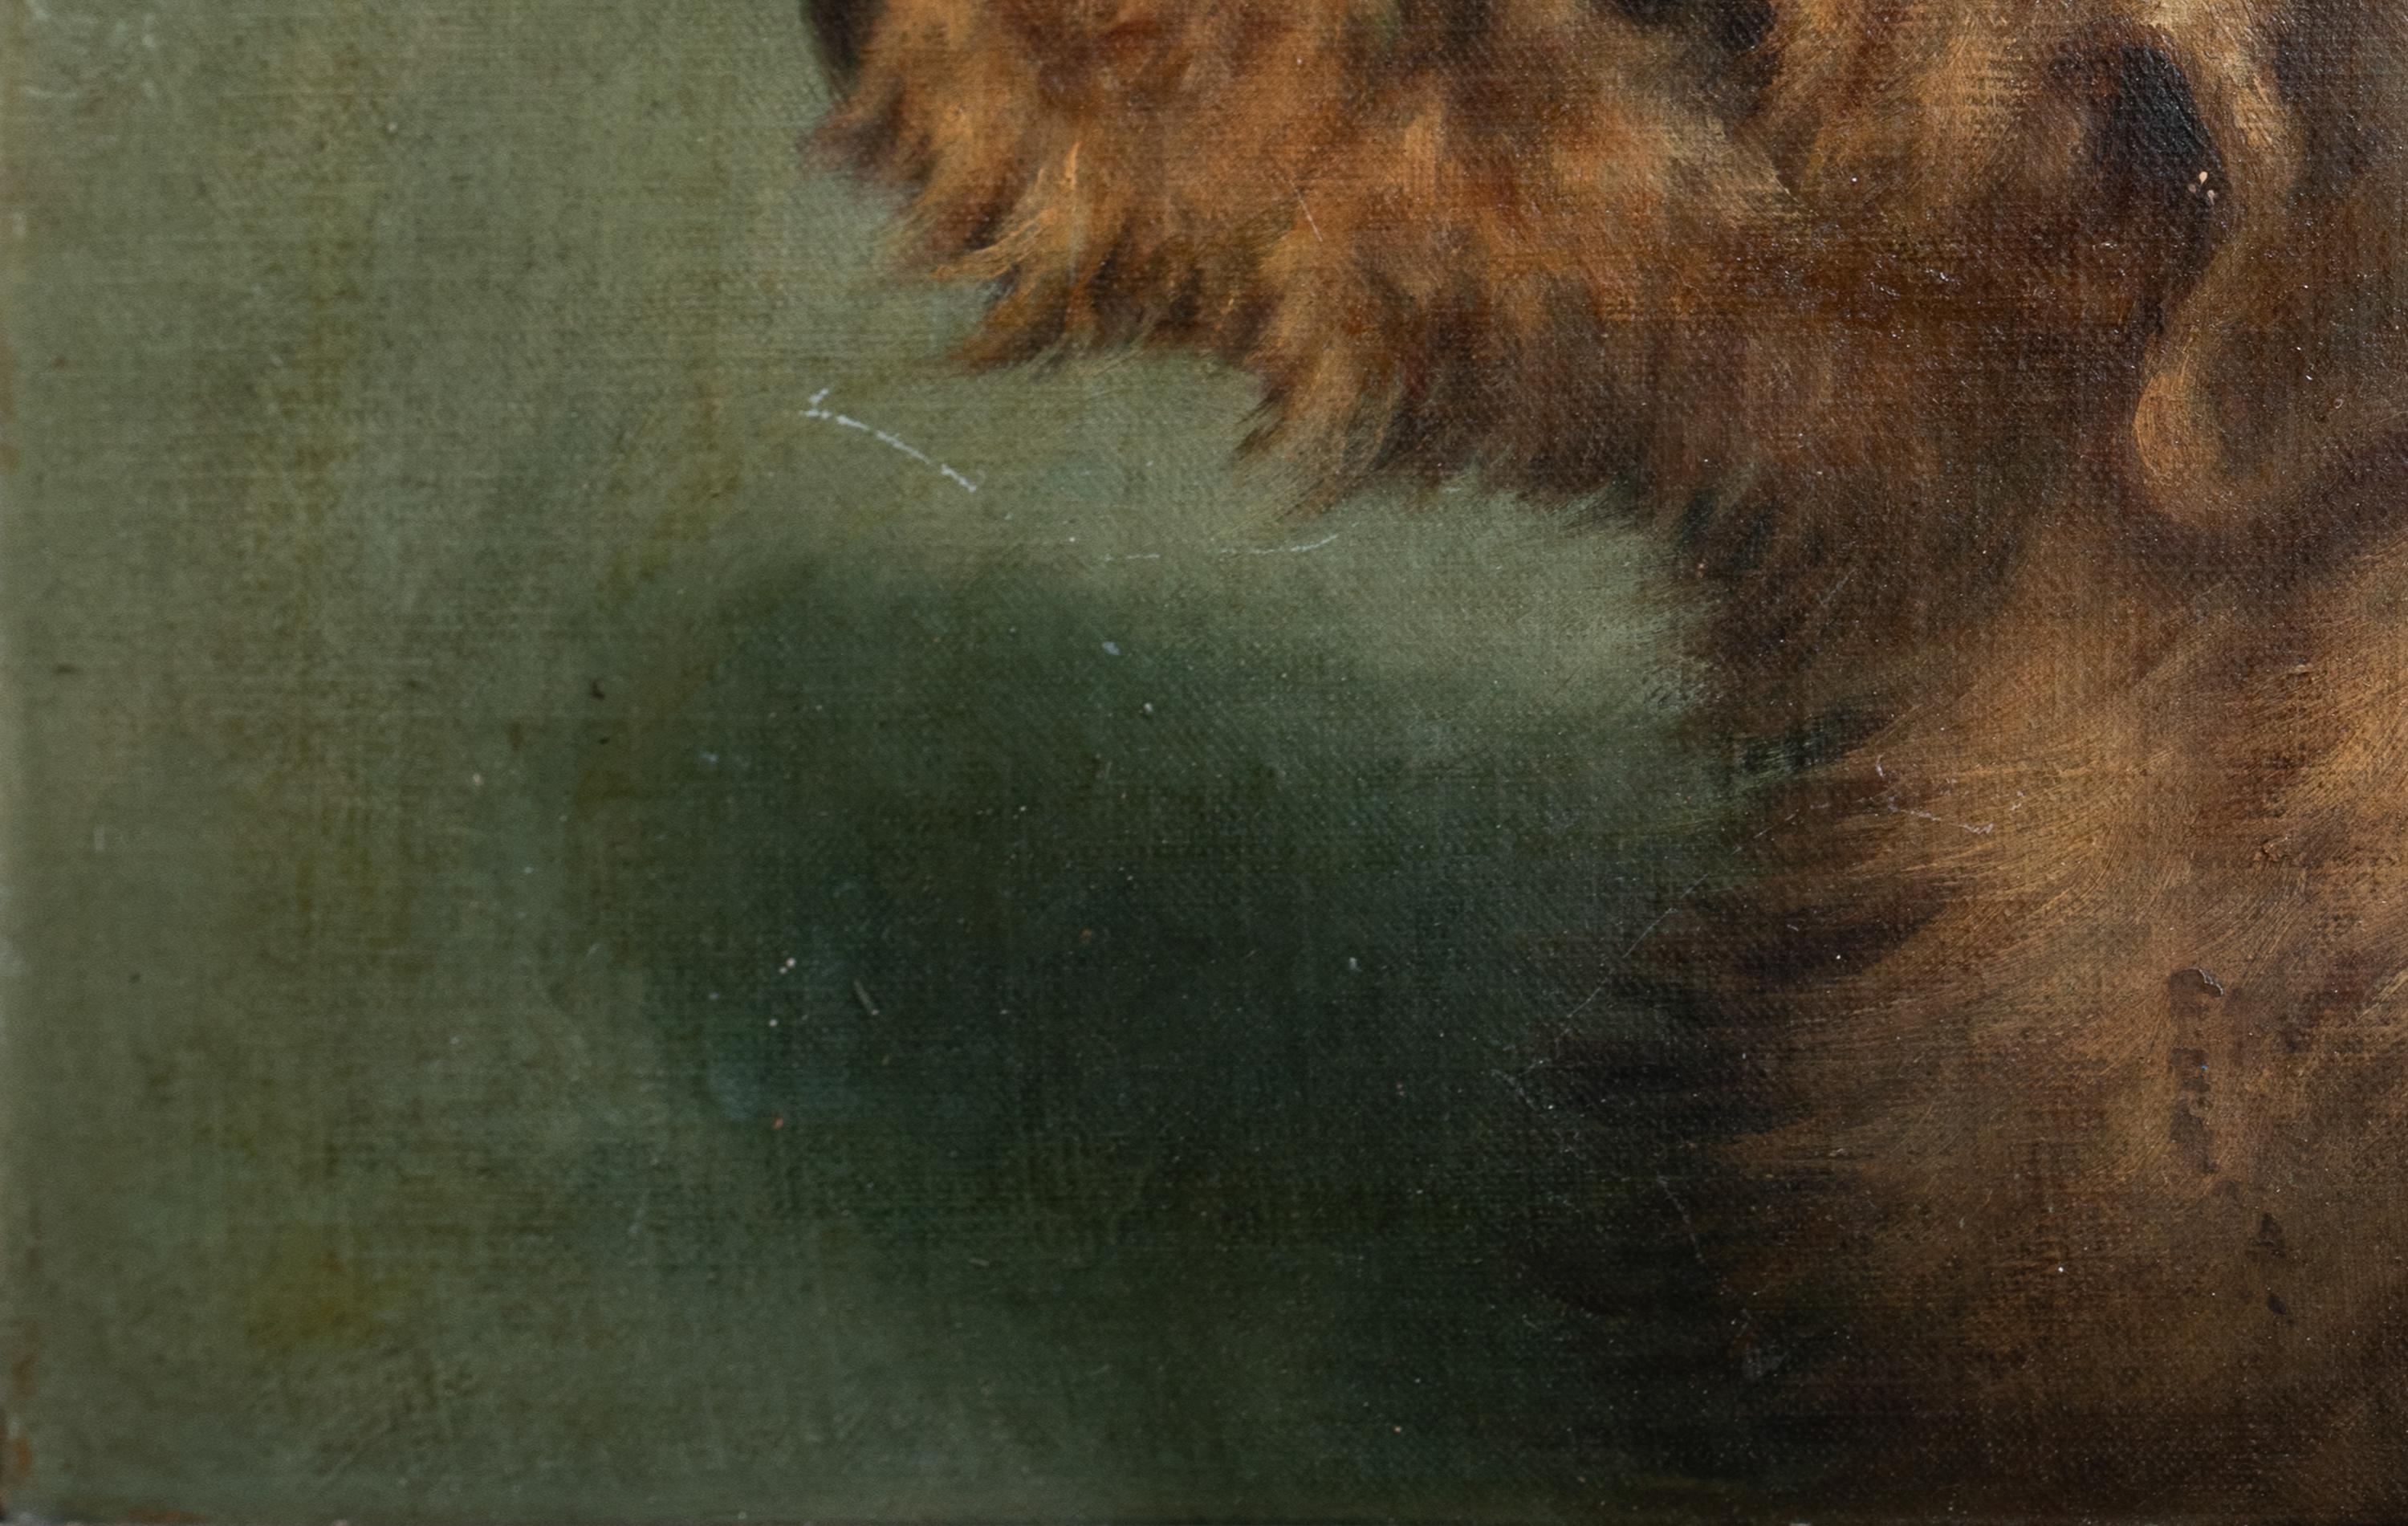 Portrait Of An Irish Terrier, 19th Century  signed top right 